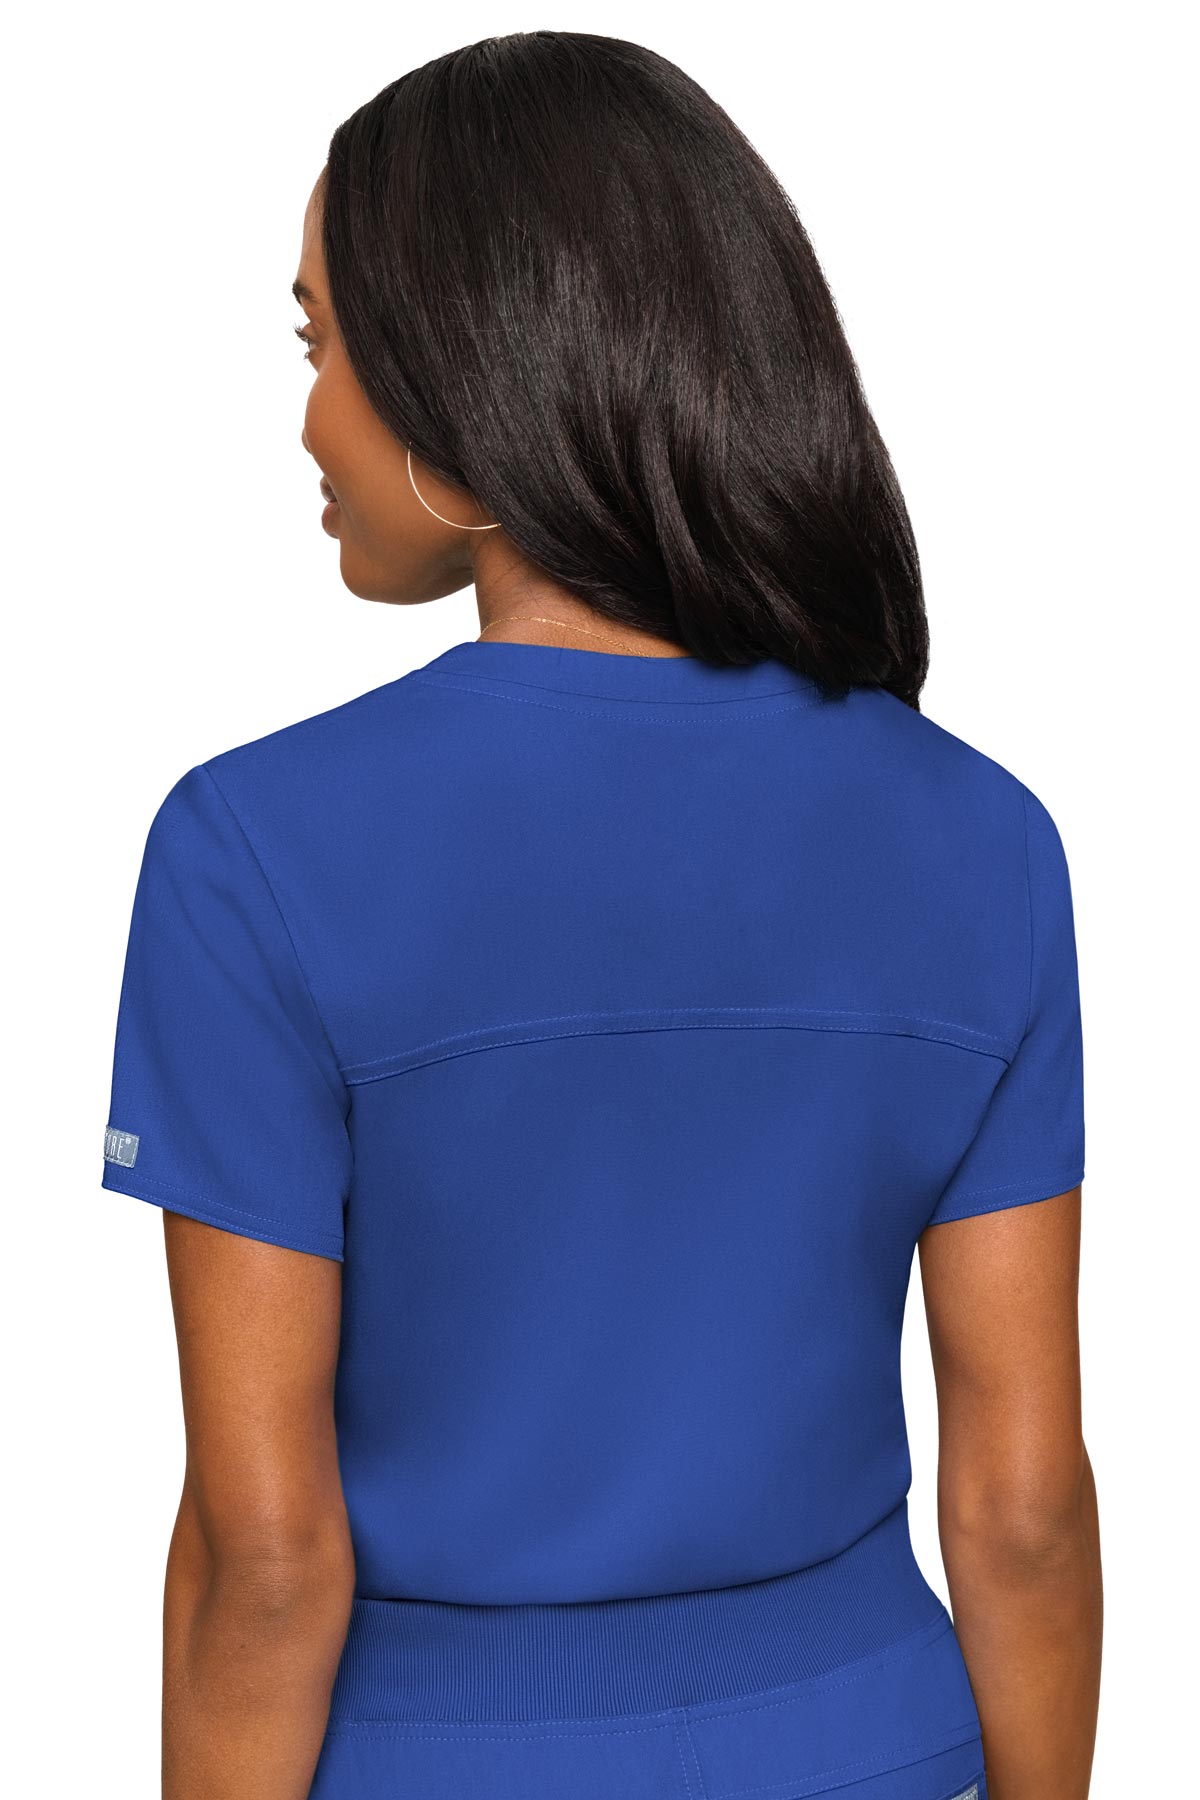 Med Couture Touch 7448 Women's Tuckable Chest Pocket Top Royal Back